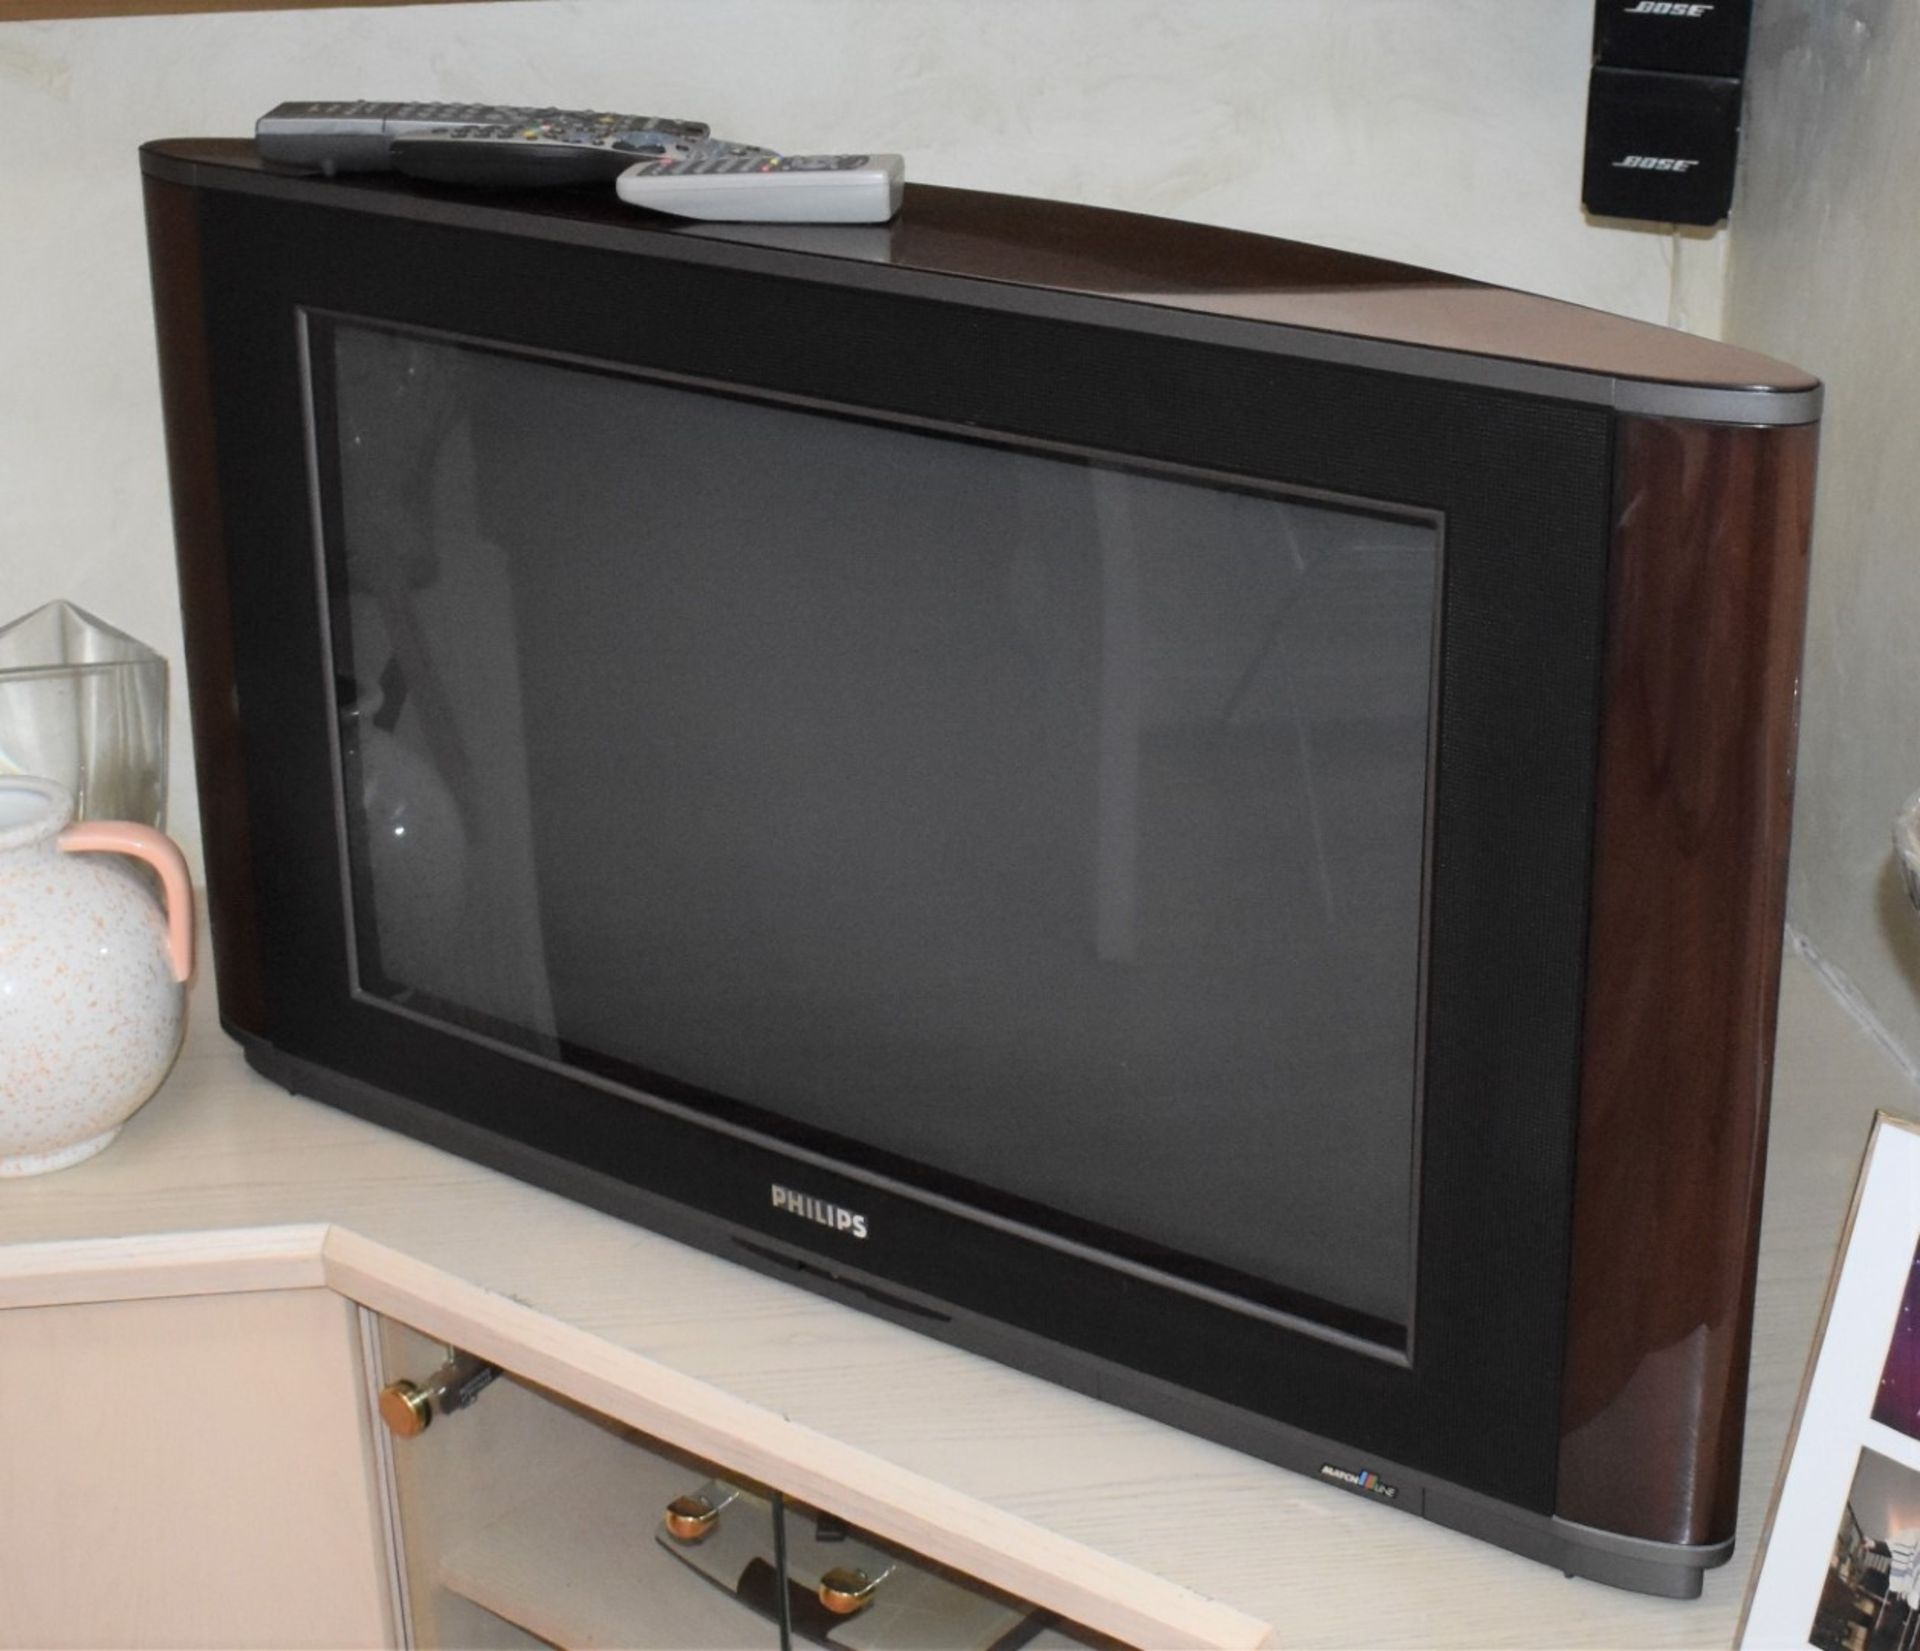 1 x Retro Philips CRT Television With Cherrywood Finish and Matching Stand - CL579 - No VAT on the - Image 3 of 4